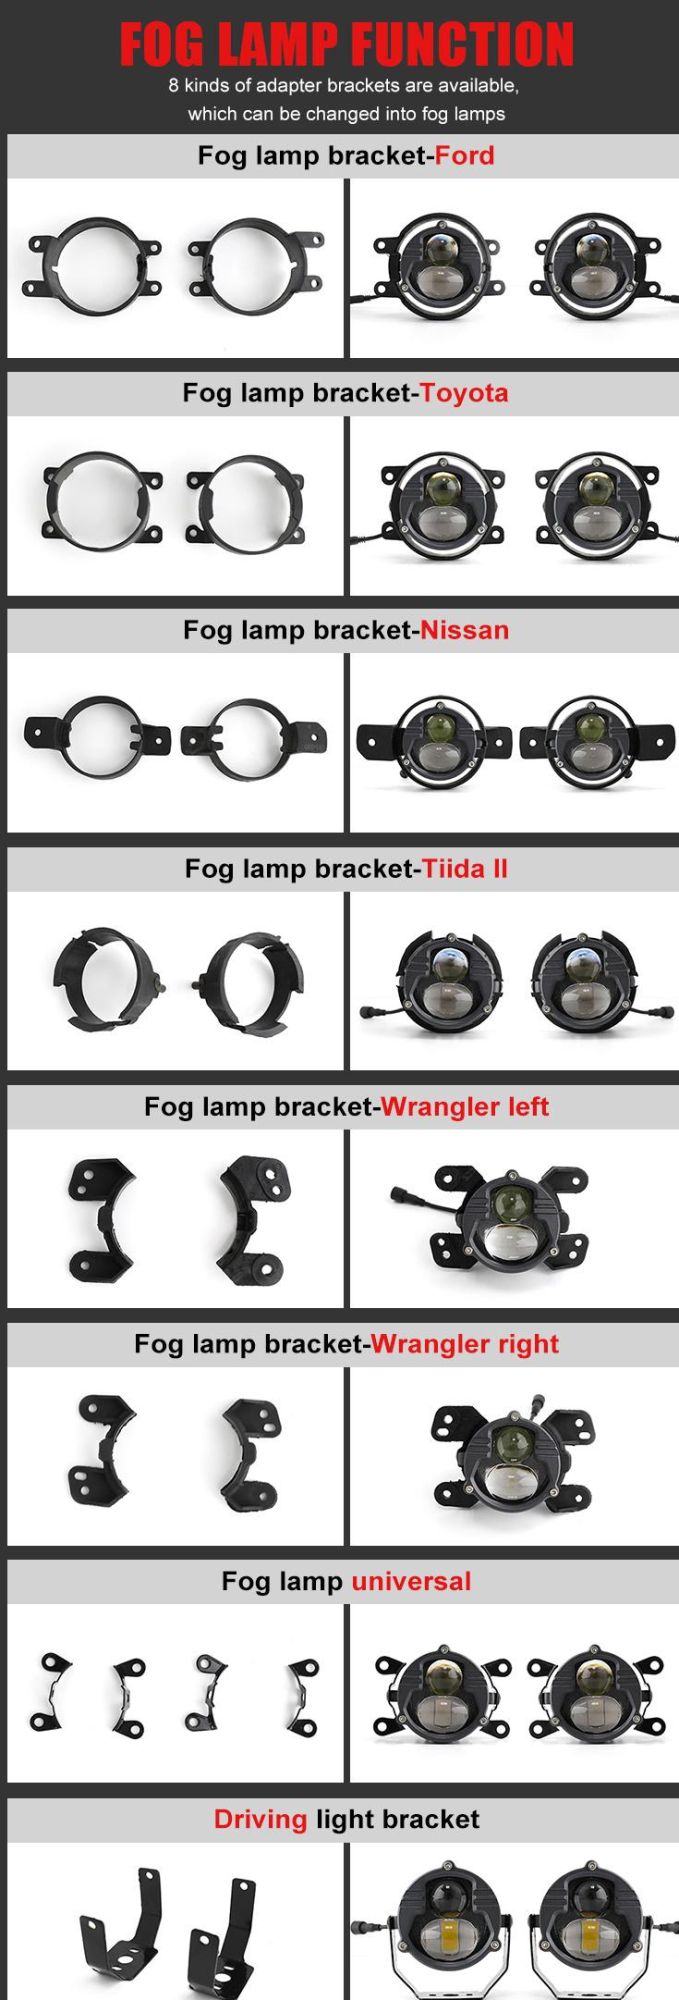 1lux@1500m 60W 3inch Three Color Auxiliary Lamp High Low Beam White Yellow Lens Fog Lights Offroad Motorcycle Car Mini Laser LED Work Driving Lights for Toyota